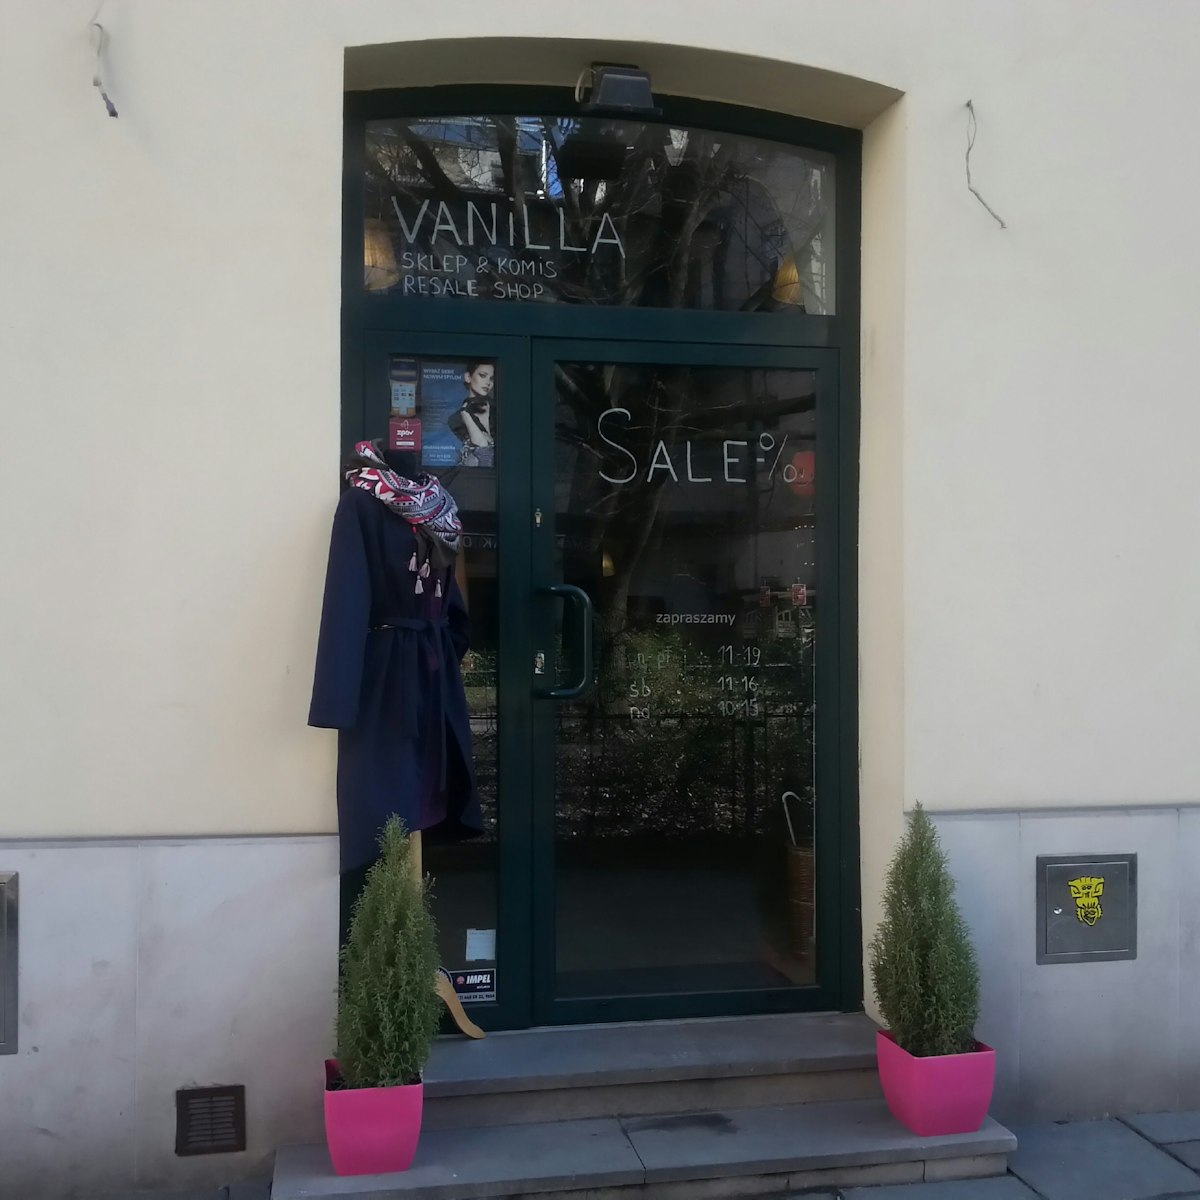 Vanilla, the entrance to the shop is small and unassuming so keep an eye out